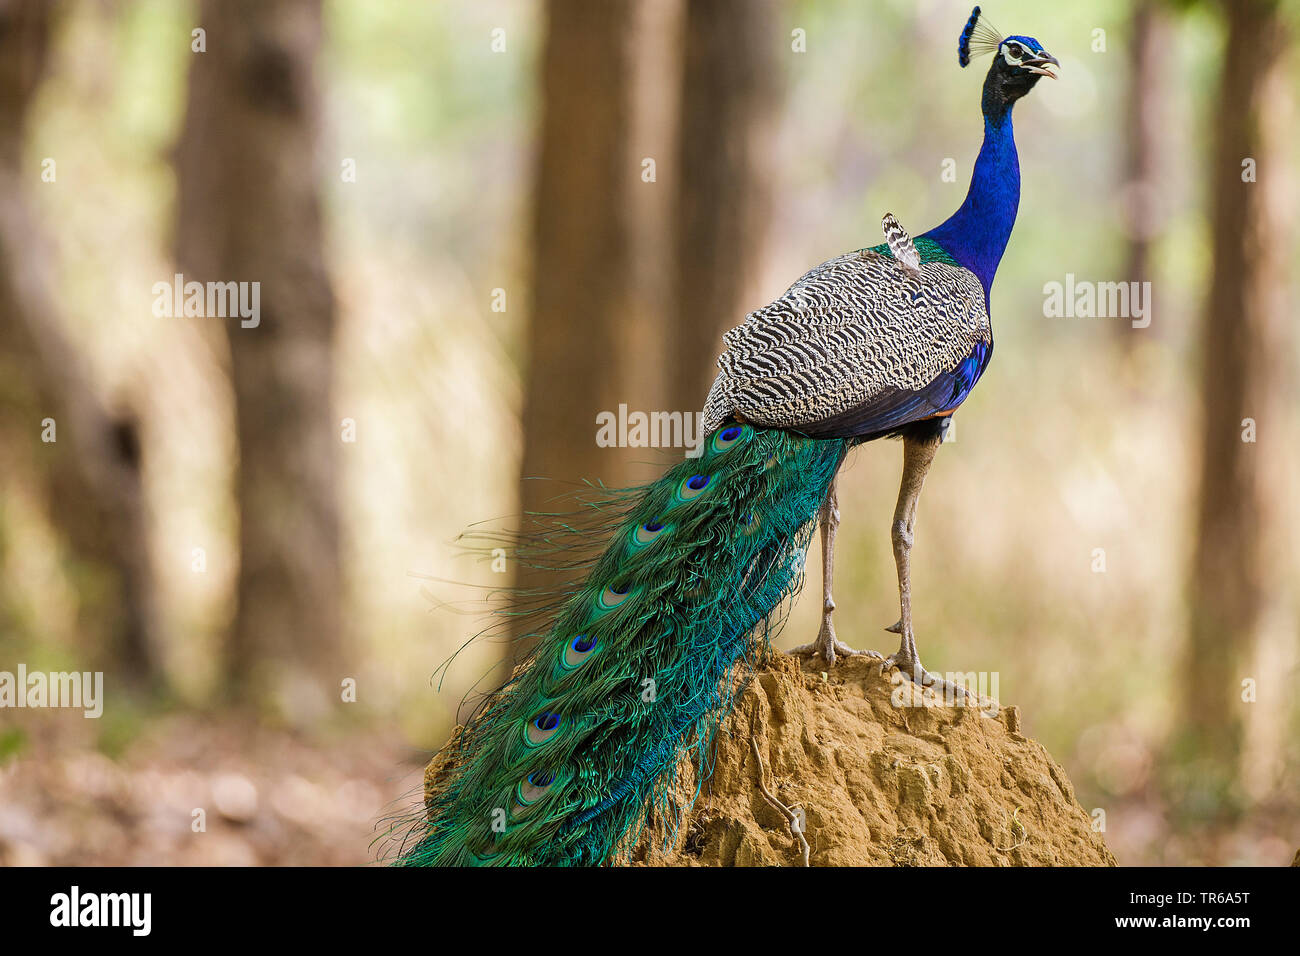 Common peafowl, Indian peafowl, blue peafowl (Pavo cristatus), calling peacock standing on a mound of earth, side view, India, Madhya Pradesh, Kanha National Park Stock Photo